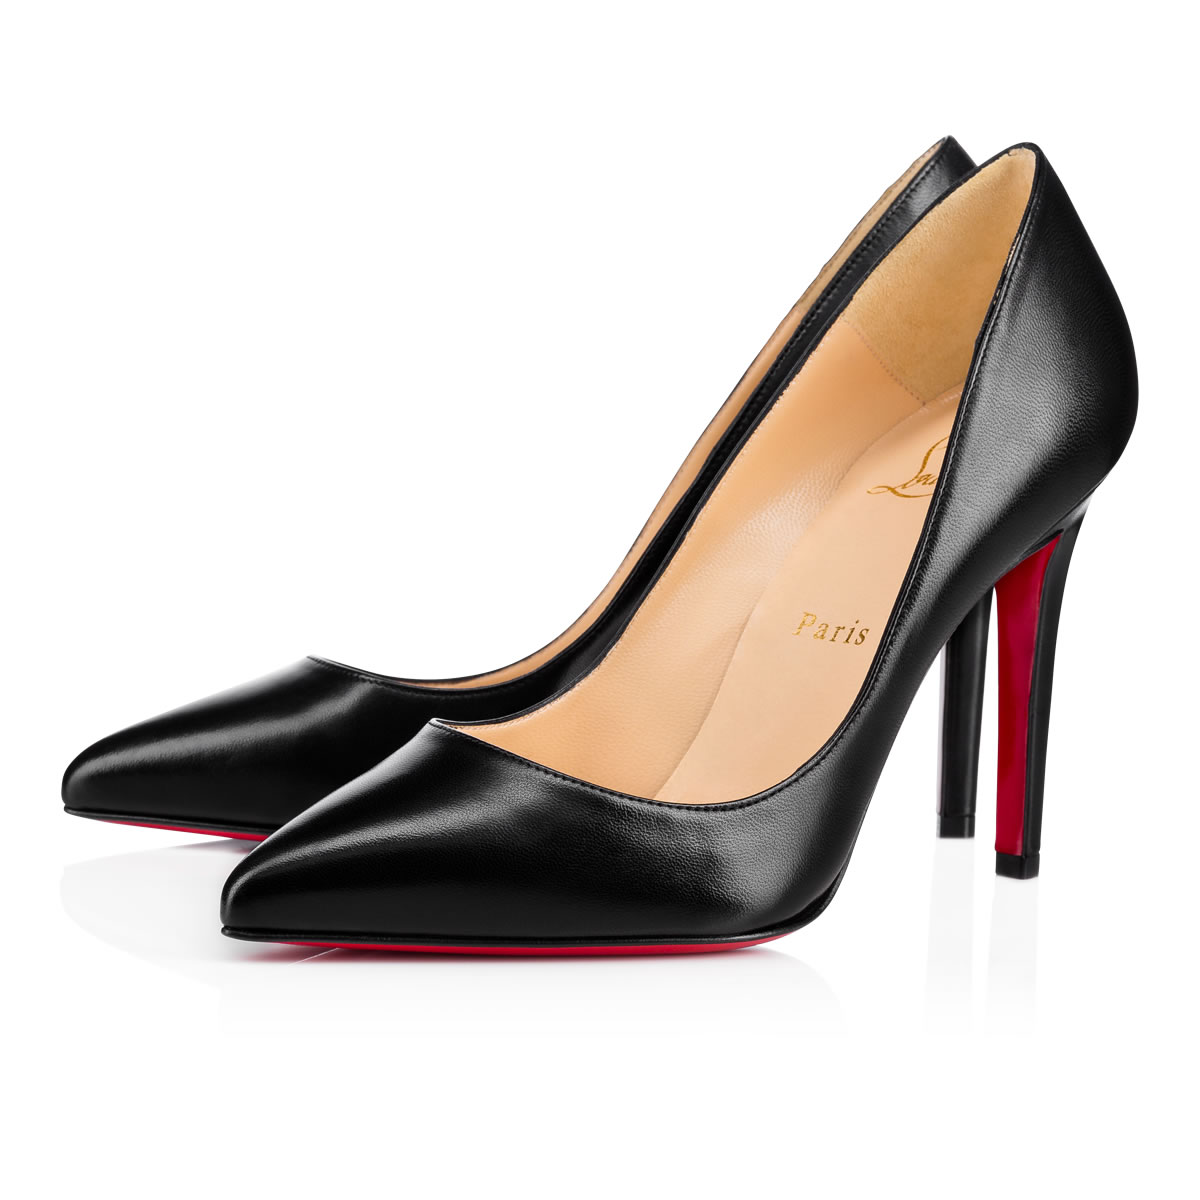 Louboutin Pumps Review - Unwrapped